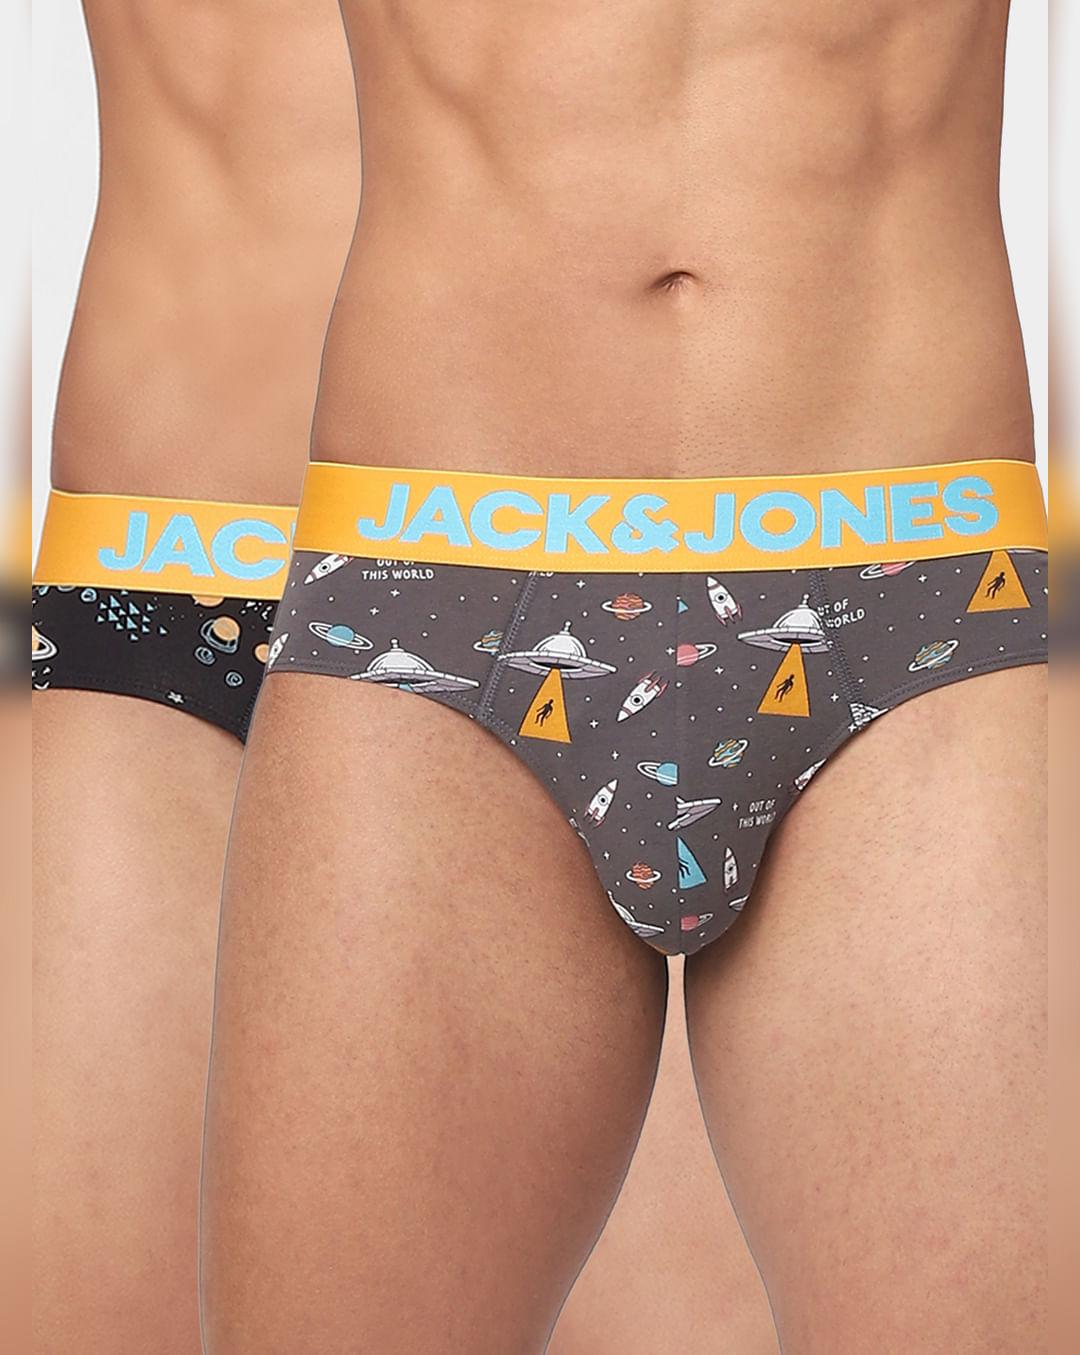 Grey & Black Graphic Print Briefs - Pack of 2